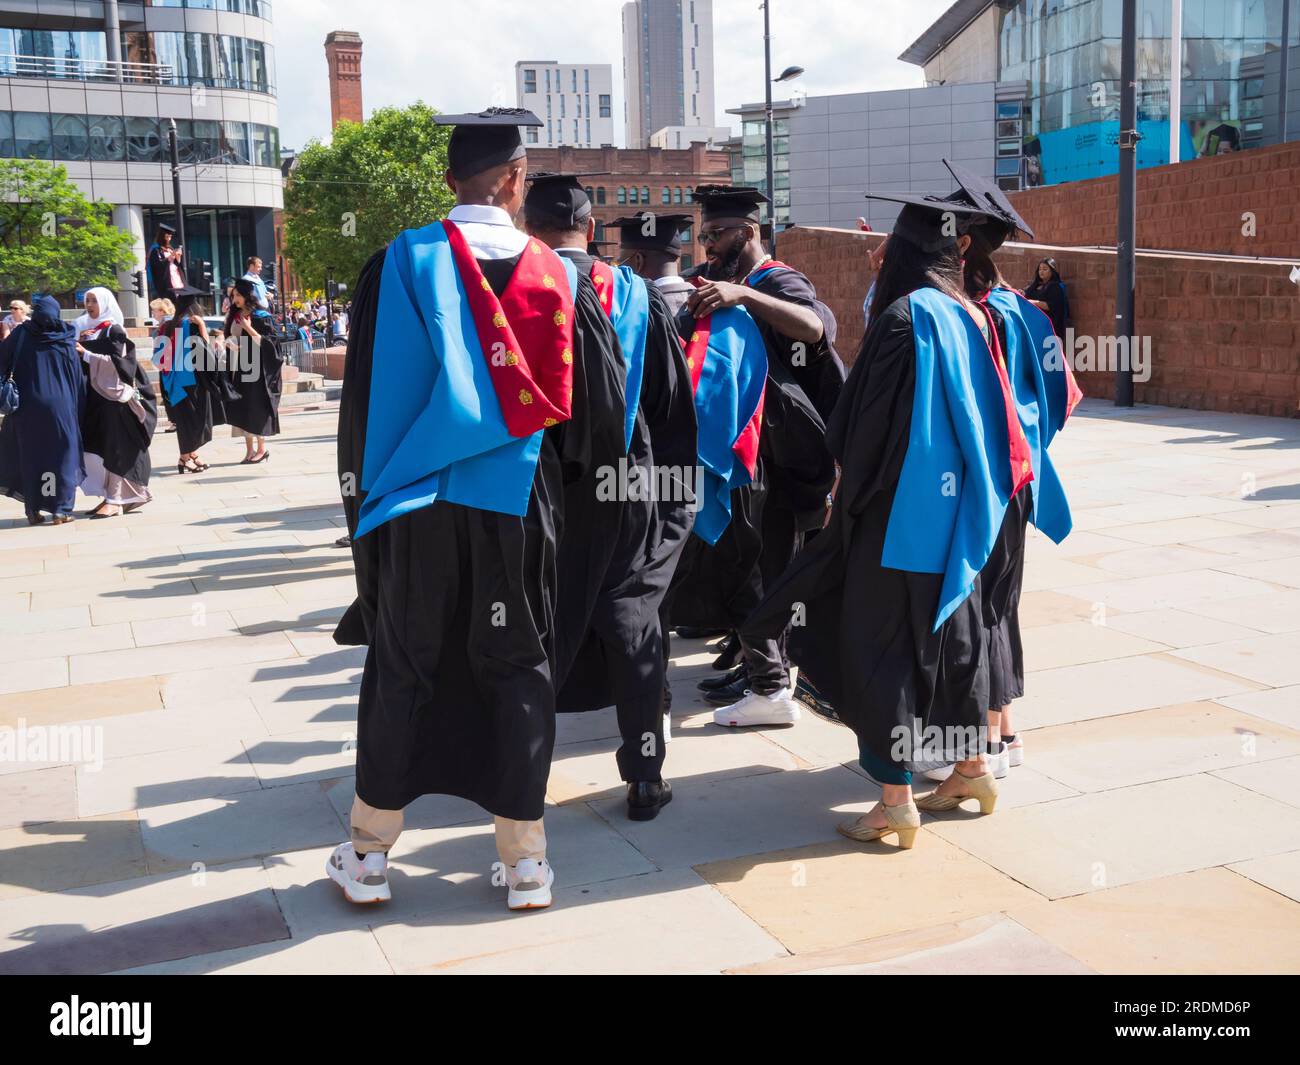 The image is of groups of graduates with family and friends celebrating their achievement as graduates at Manchester Met University Stock Photo